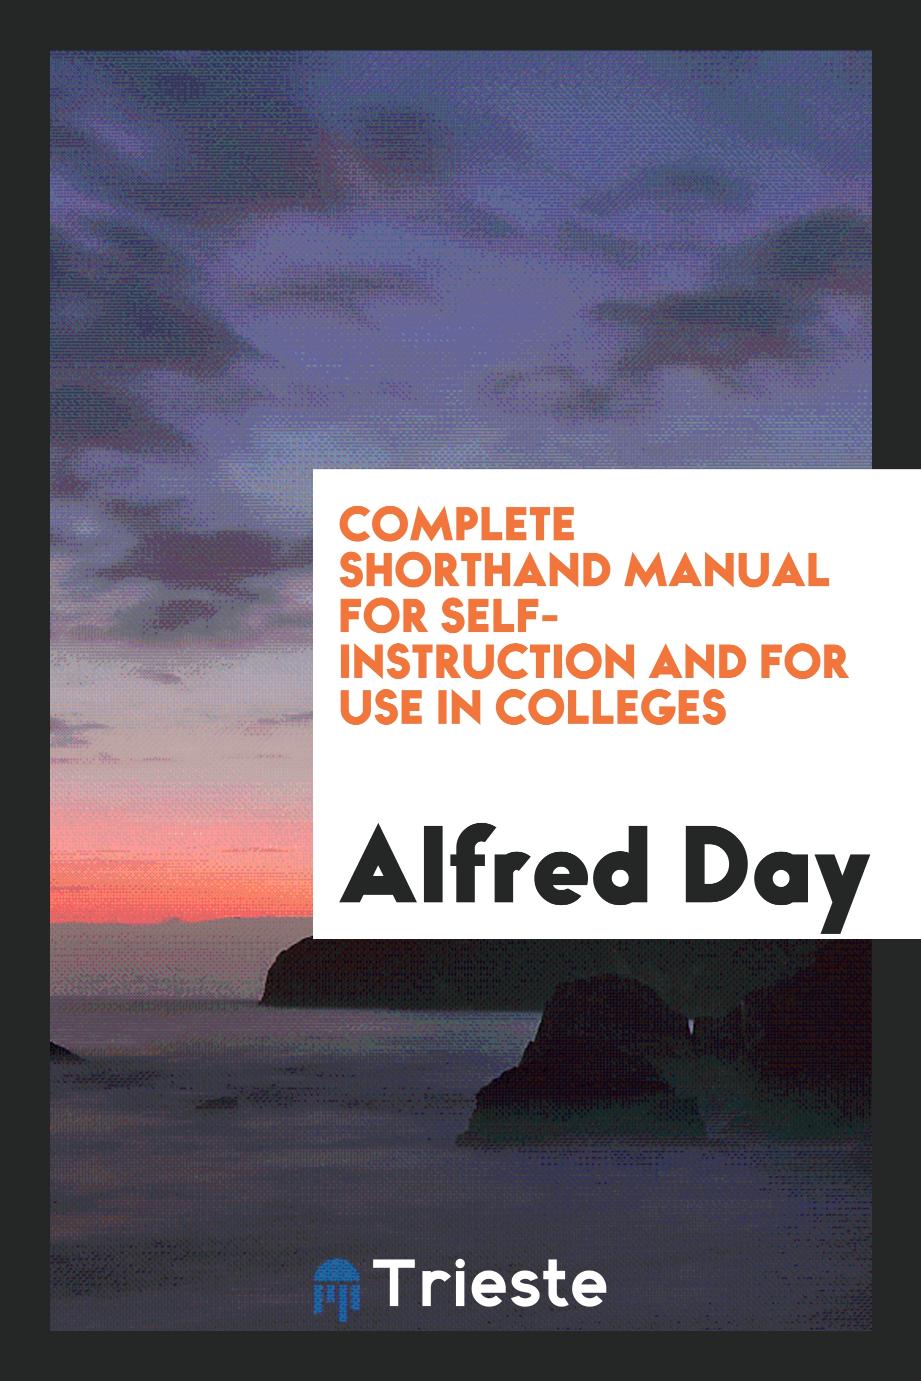 Complete shorthand manual for self-instruction and for use in colleges